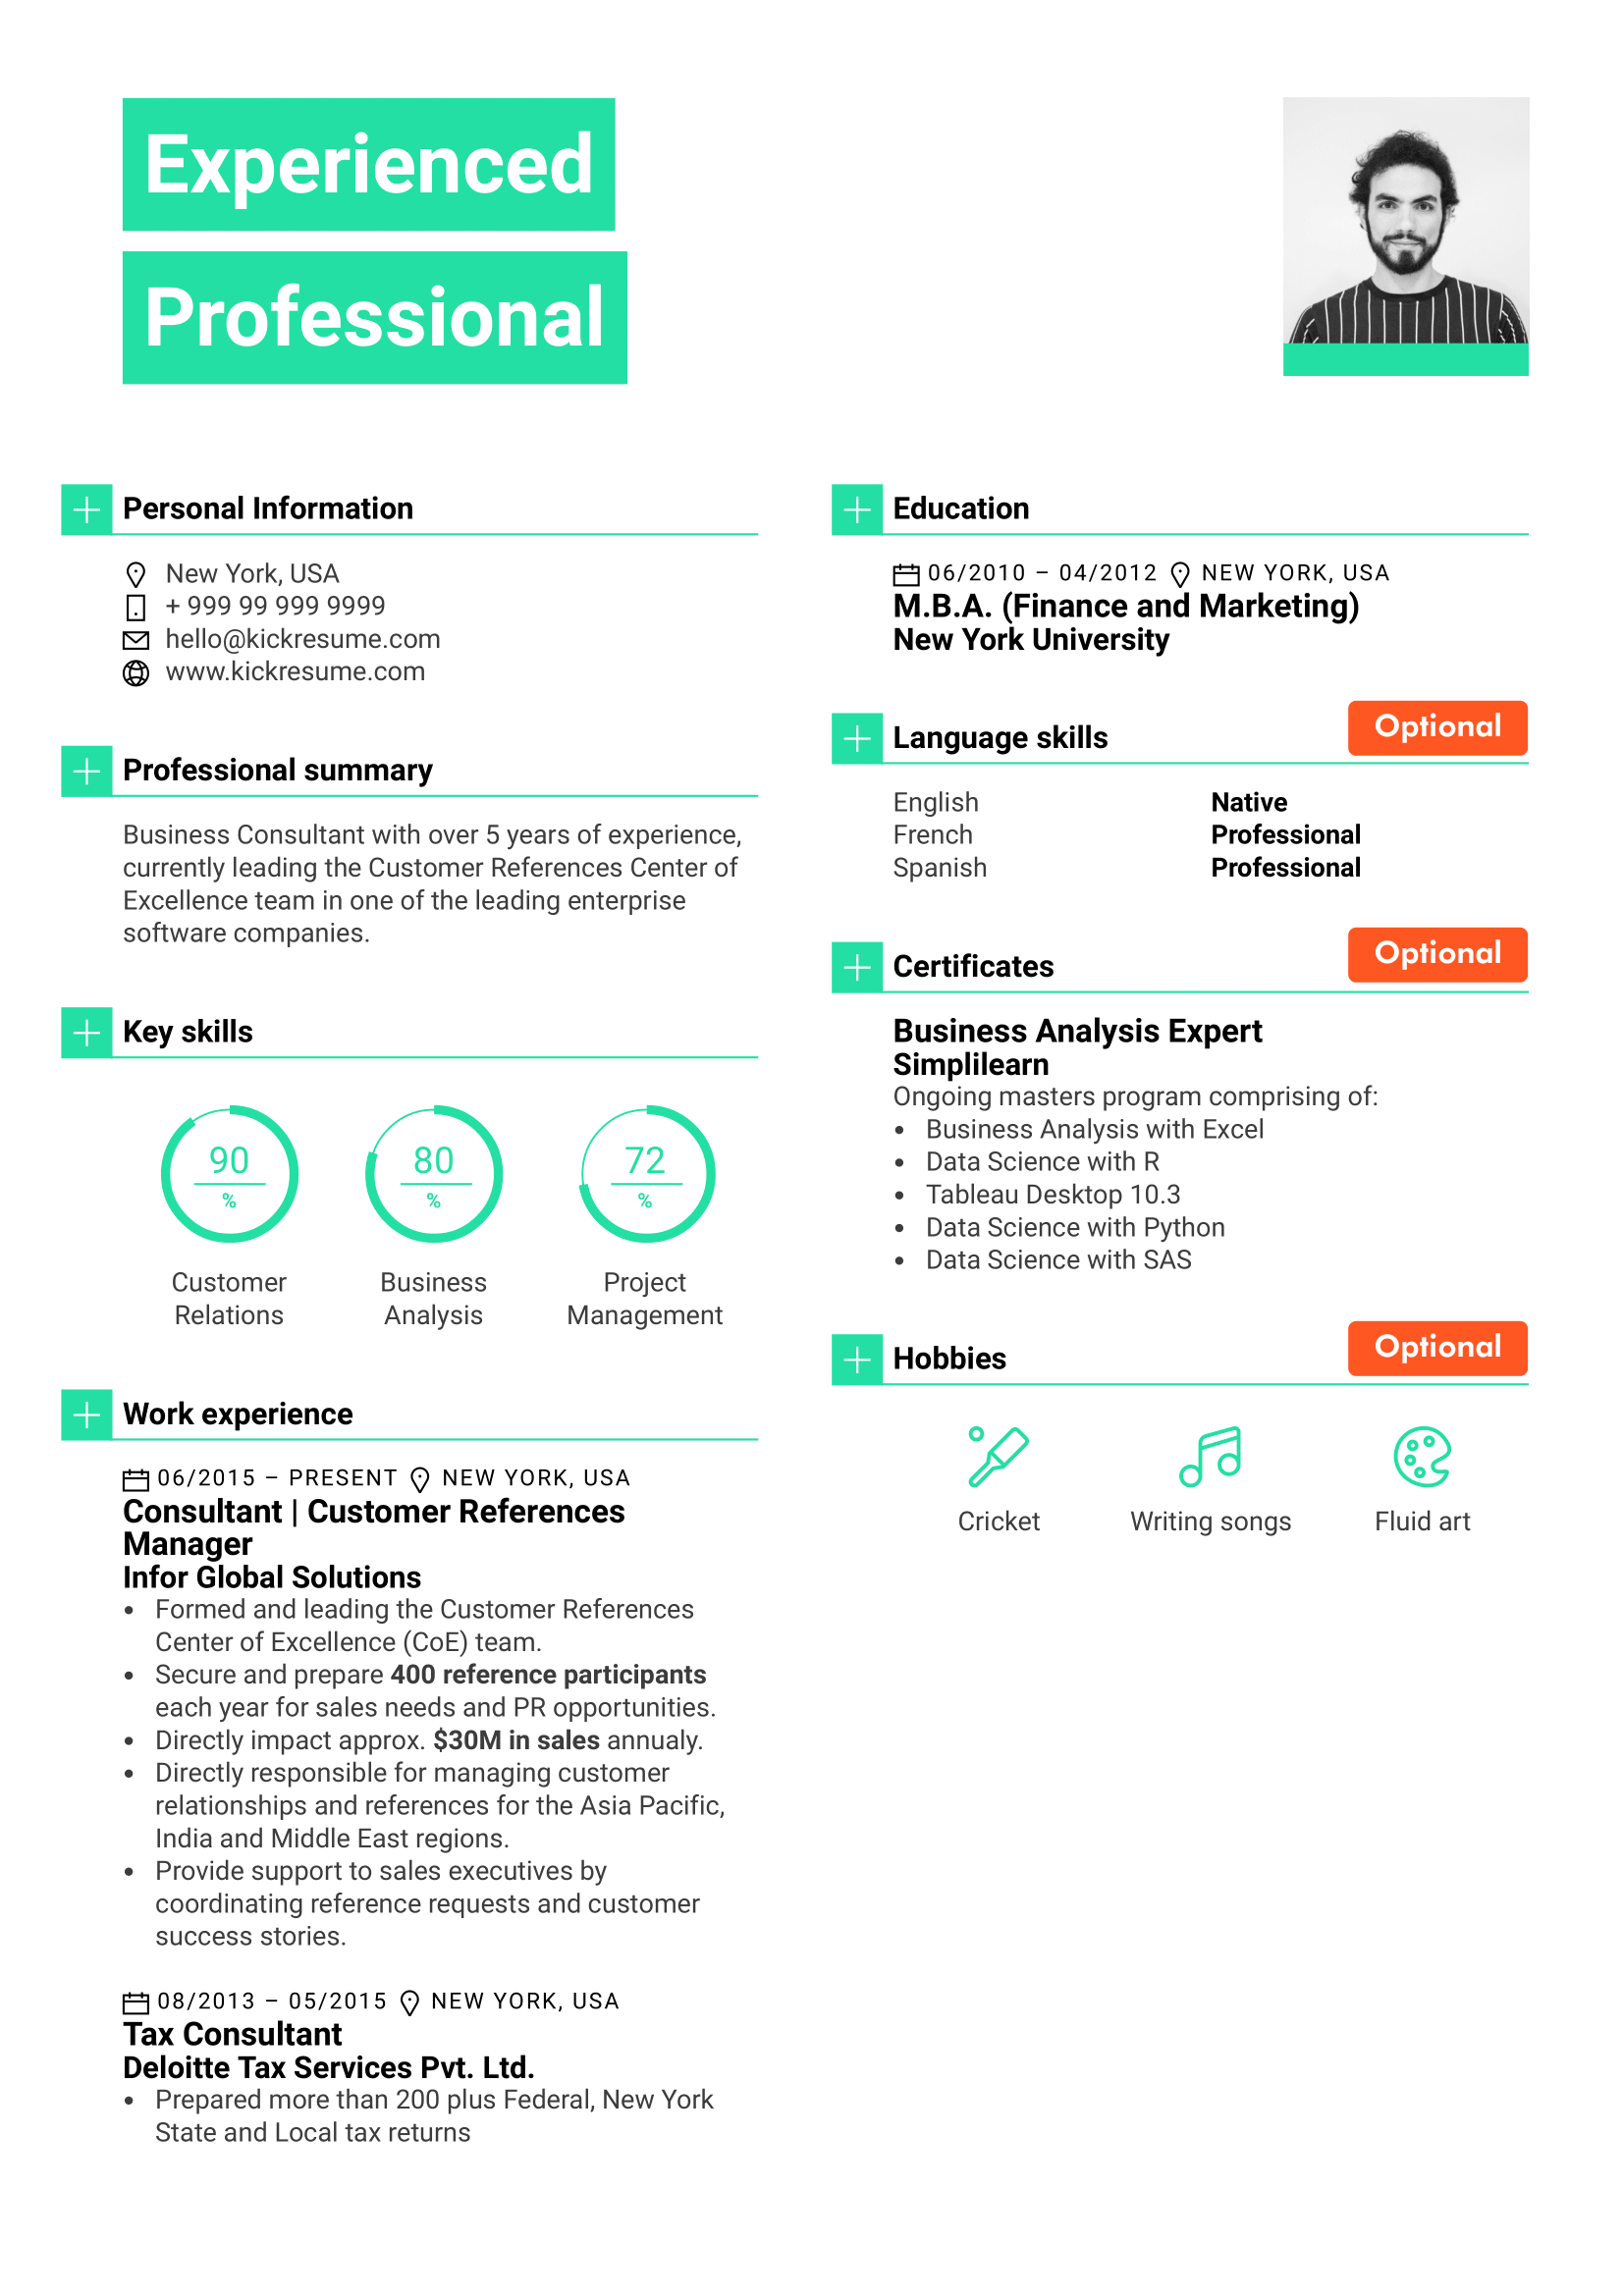 Resume Sections: How to Organize a Resume? [+Examples]